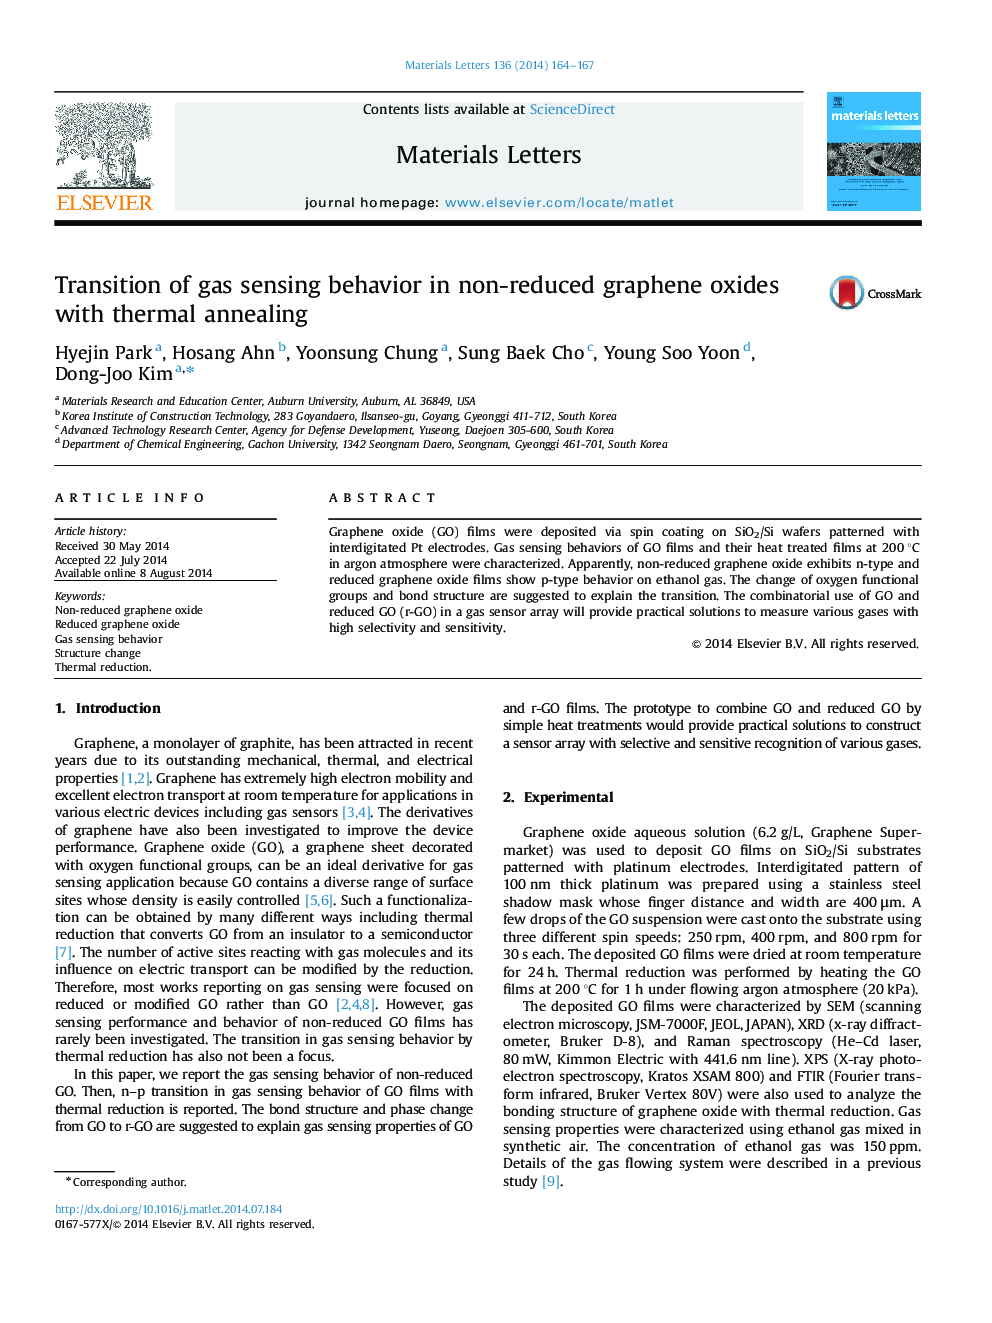 Transition of gas sensing behavior in non-reduced graphene oxides with thermal annealing